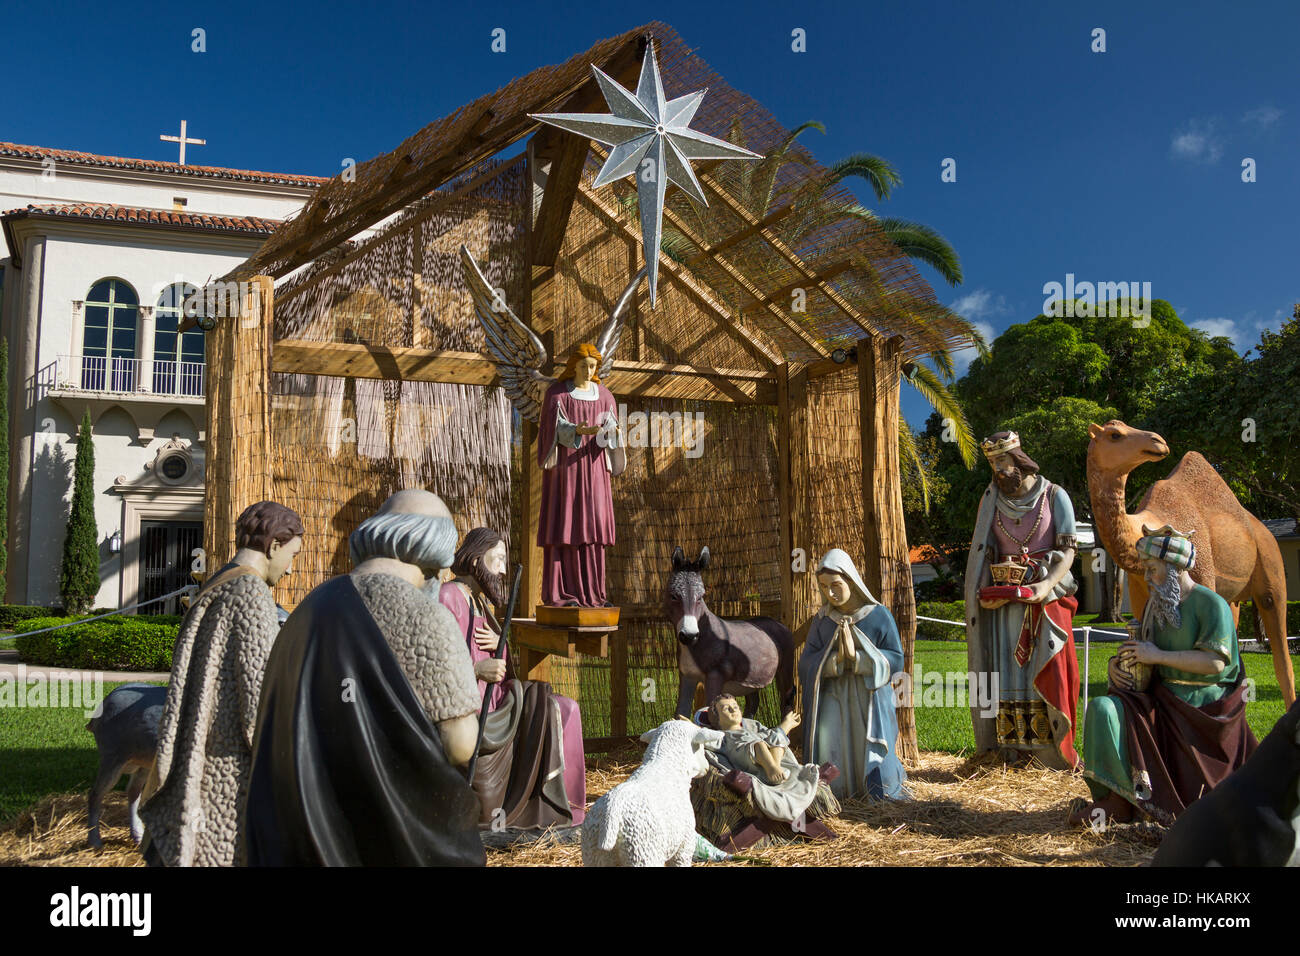 OUTDOOR LIFE SIZE CHRISTMAS NATIVITY SCENE CHURCH OF THE LITTLE FLOWER CORAL GABLES FLORIDA USA Stock Photo